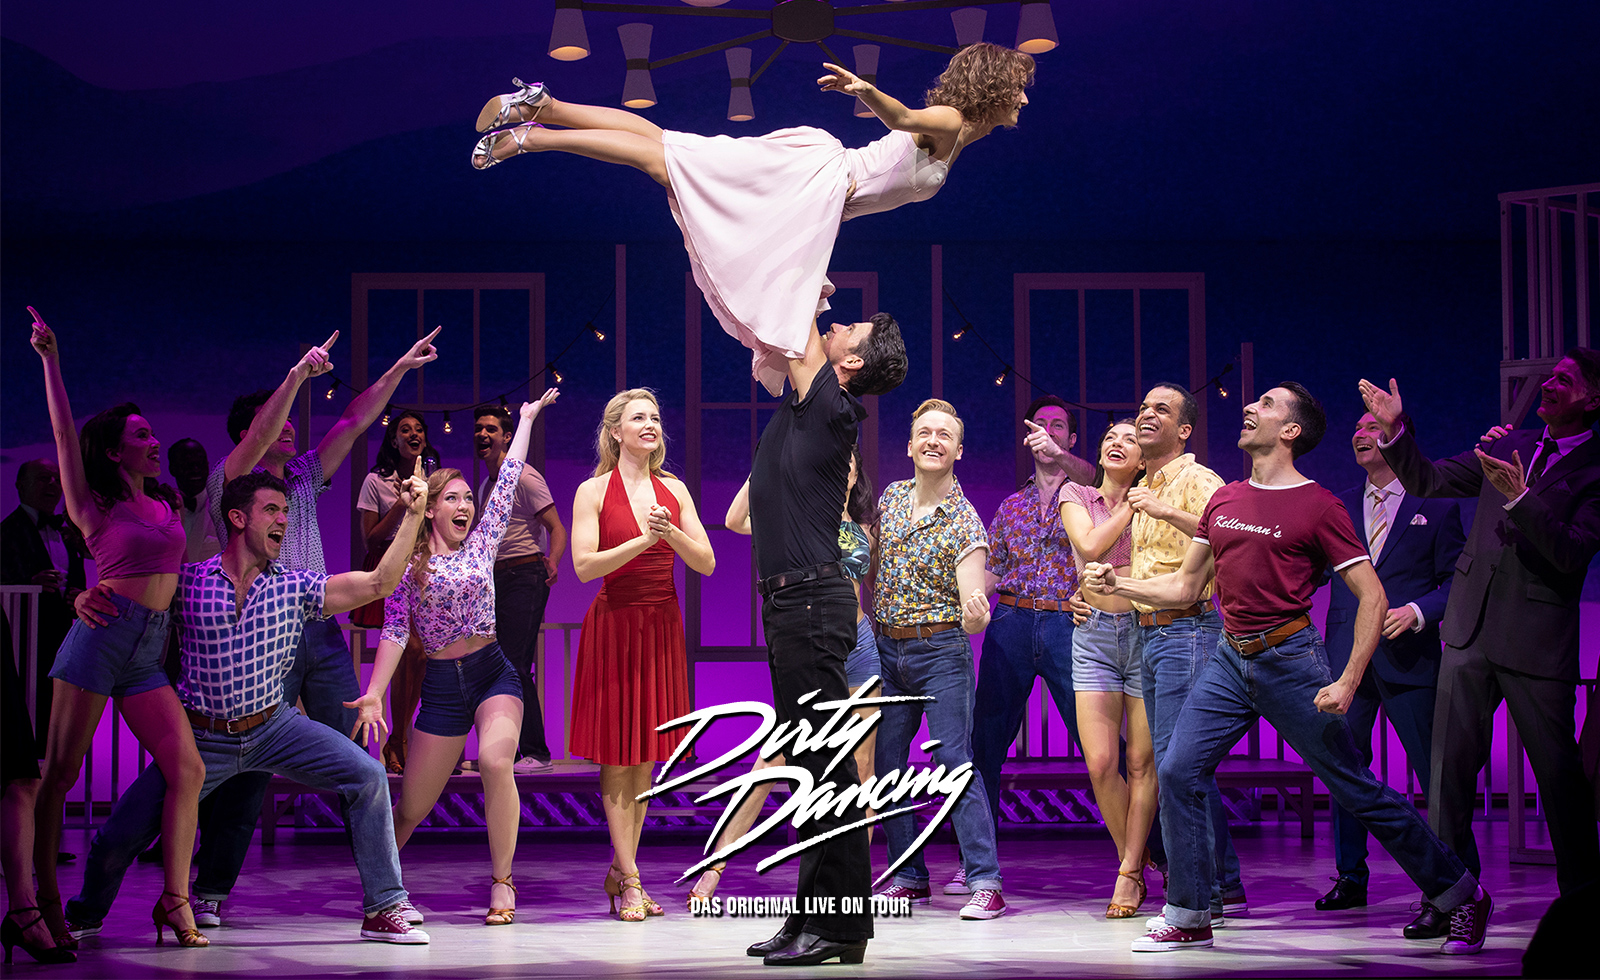 Dirty Dancing Musical am Anfang seiner Karriere